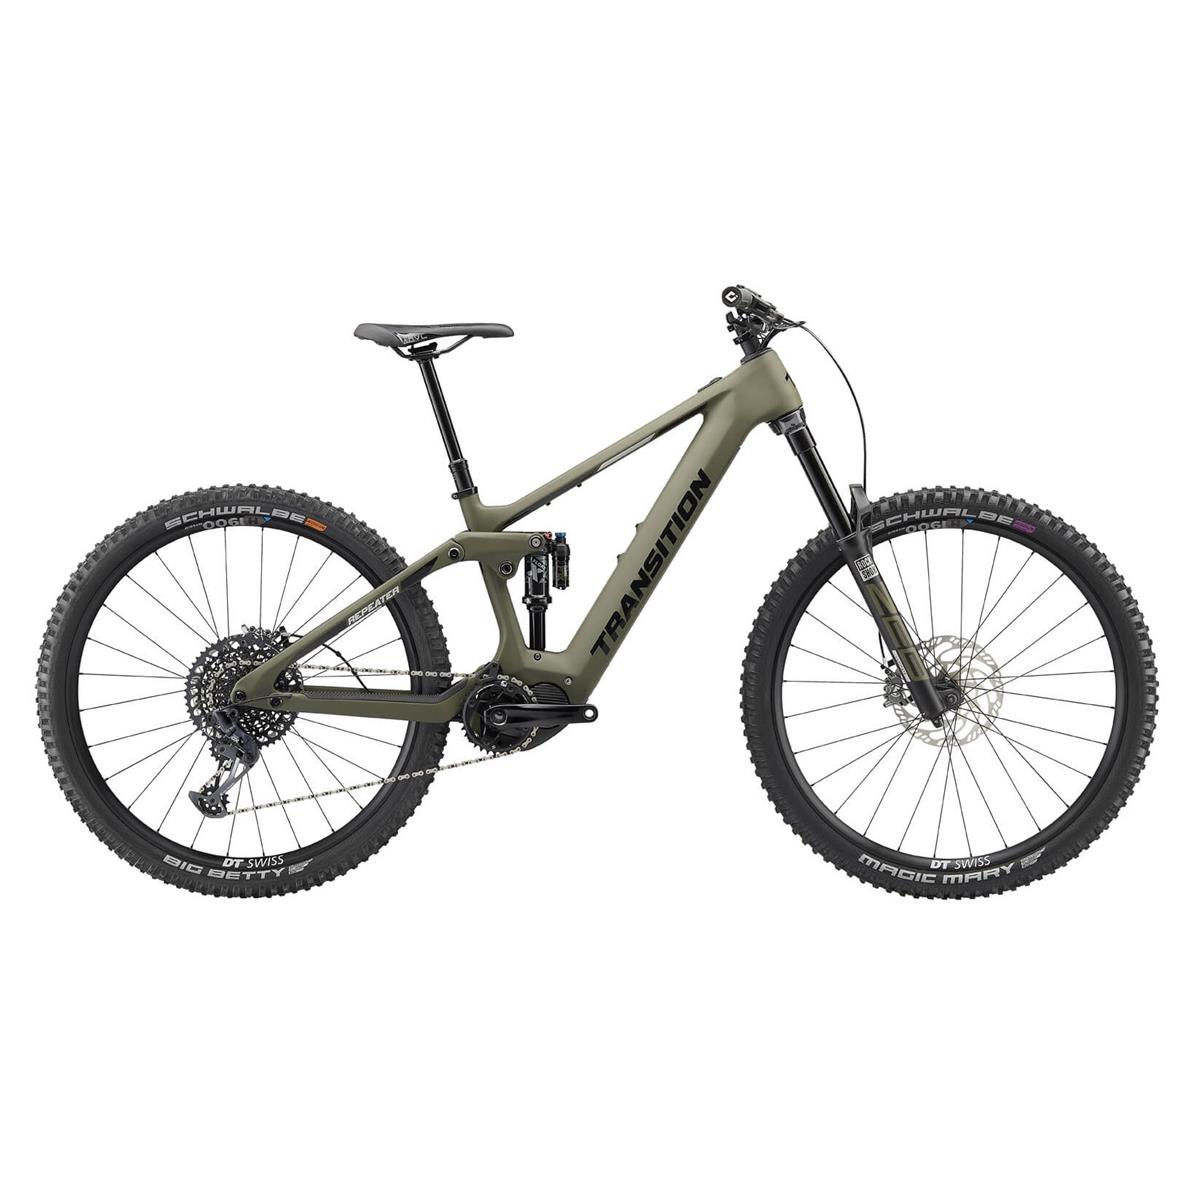 Repeater Carbon GX 29'' 160mm 12s 630Wh Shimano EP8 Mossy Green 2022 Size S